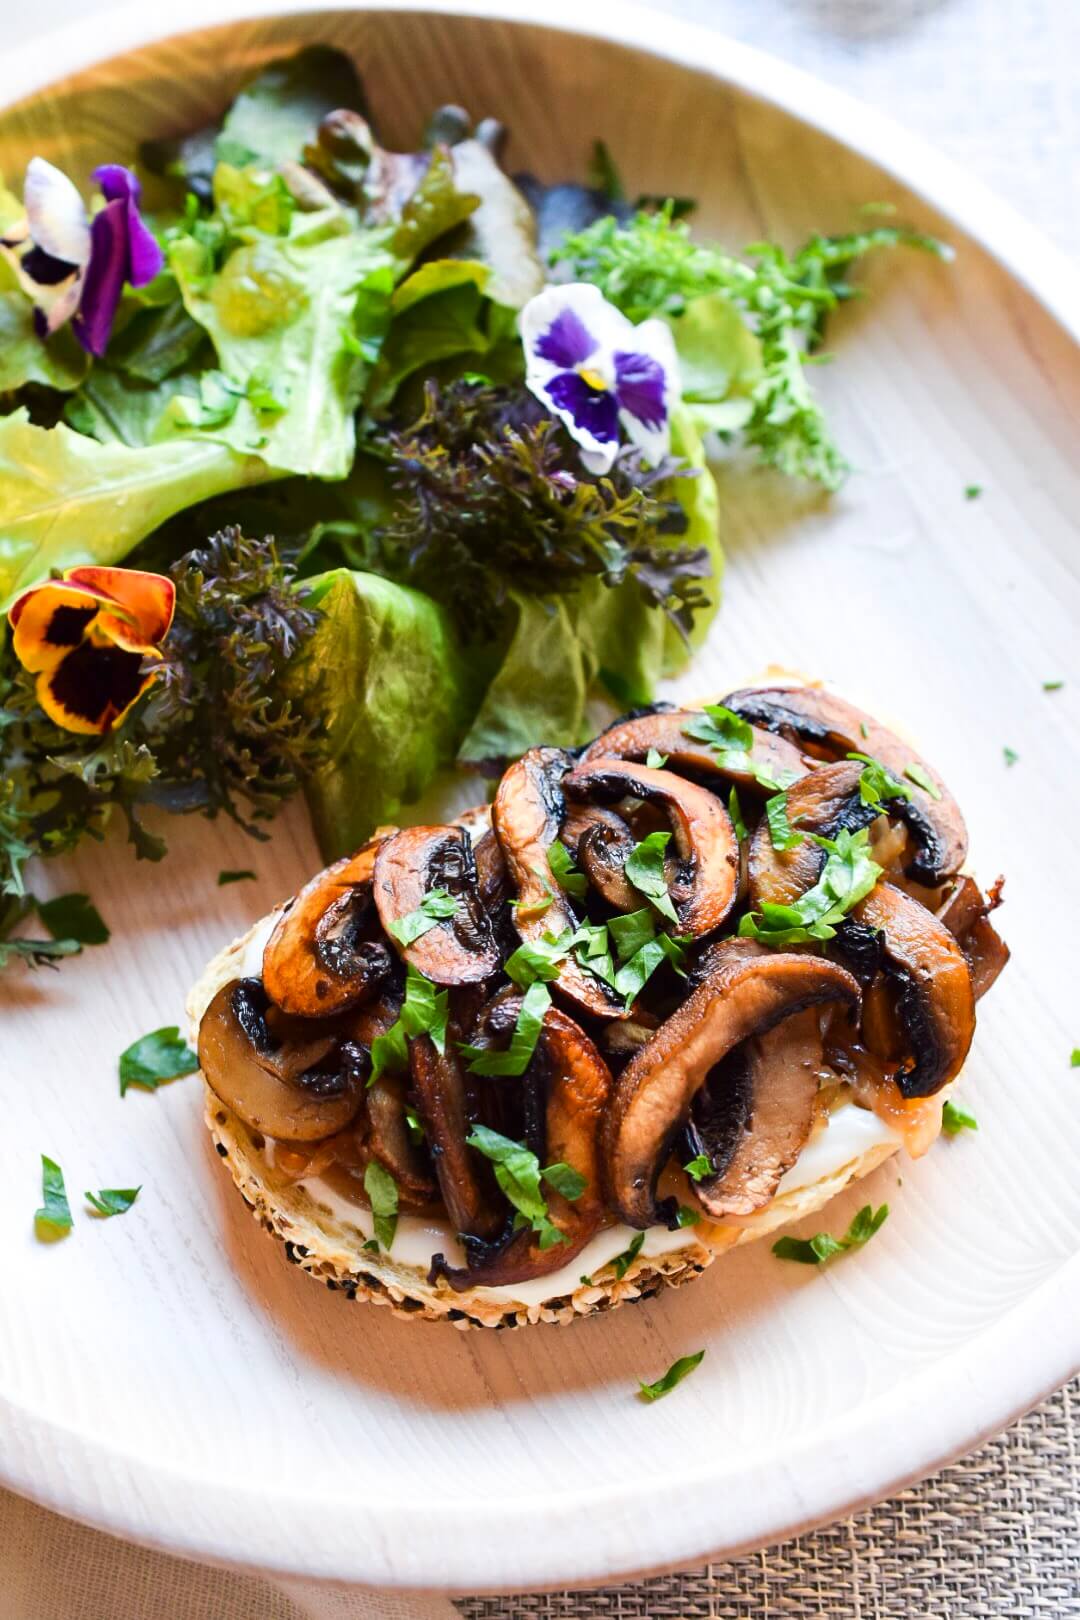 Truffled Vegan Mushrooms on Toast for the Perfect Brunch